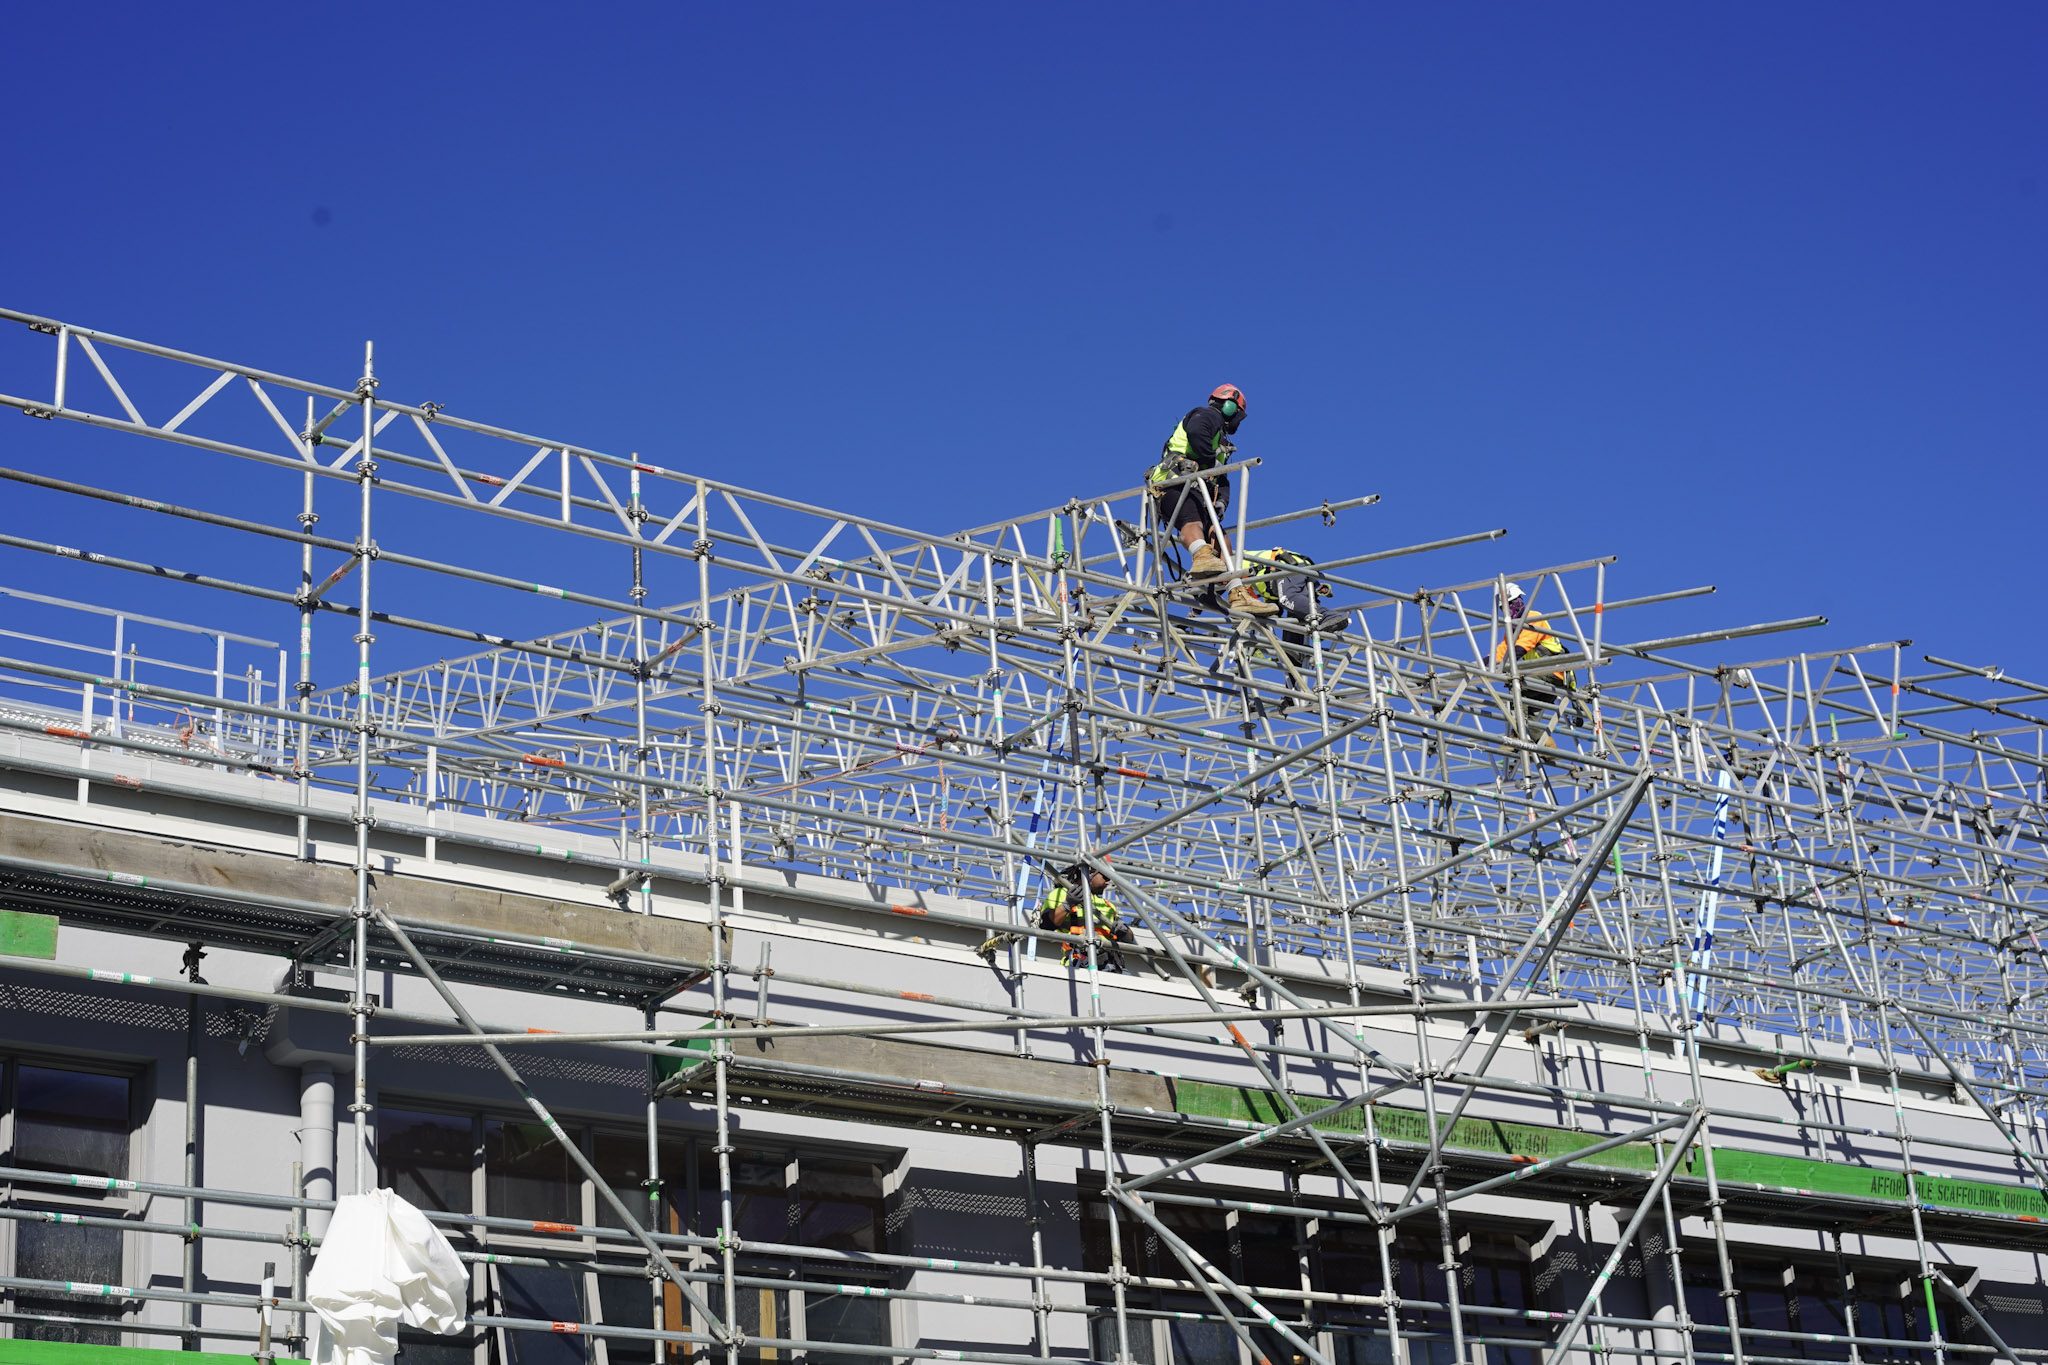 Affordable Scaffolding